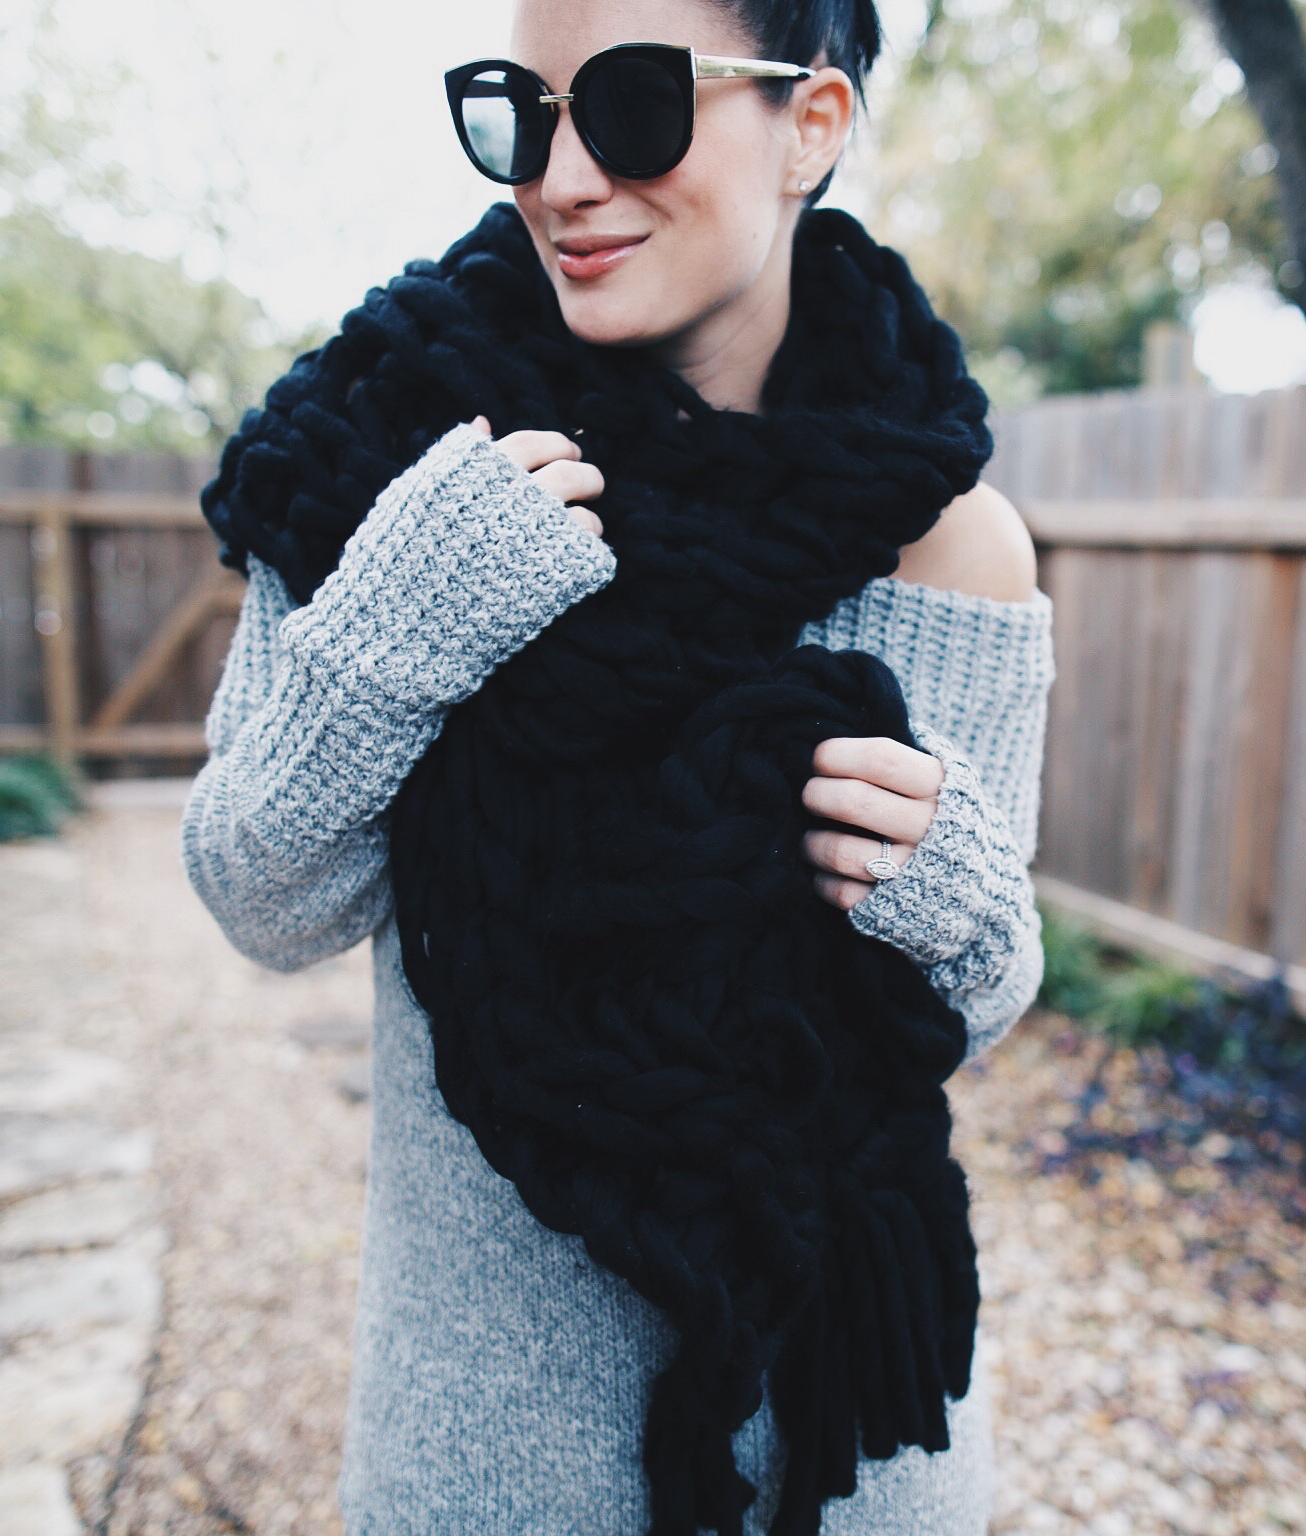 Black Chunky Knit Scarf | how to style a chunky knit scarf | how to wear a chunky knit scarf | chunky knit scarf style tips | fall scarves | scarves for fall and winter | fall fashion tips | fall outfit ideas | fall style tips | what to wear for fall | cool weather fashion | fashion for fall | style tips for fall | outfit ideas for fall || Dressed to Kill  #chunkyscarf #knitscarf #scarvesforwomen 